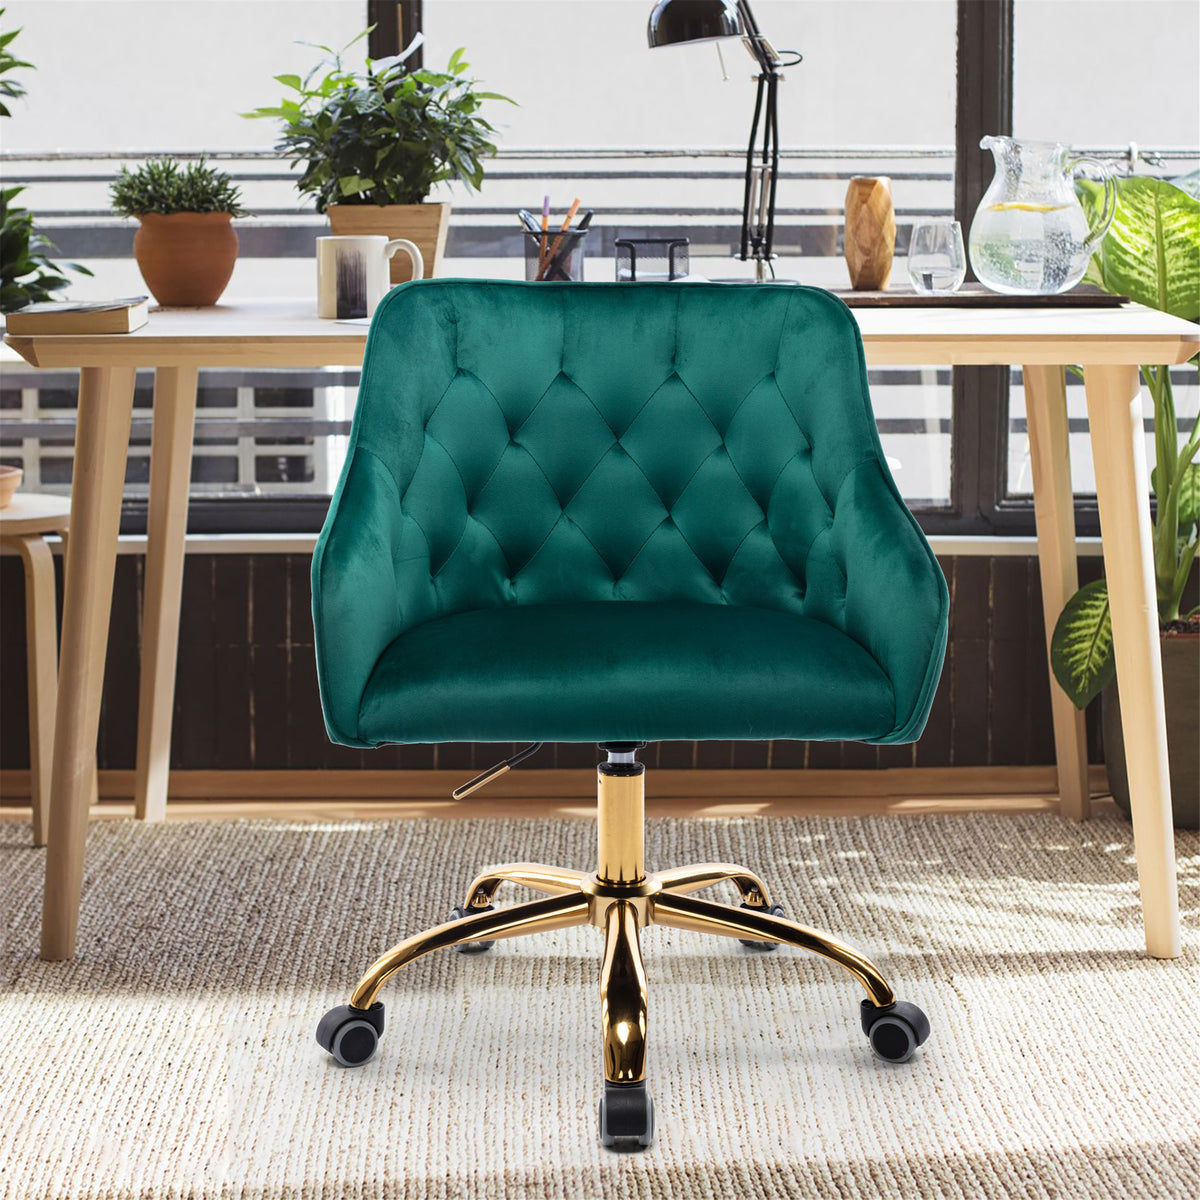 NOBLEMOOD Swivel Shell Accent Chair for Living Room, Modern Leisure Home Office Chair w/ Adjustable Height and Metal Base for Bedroom, Green